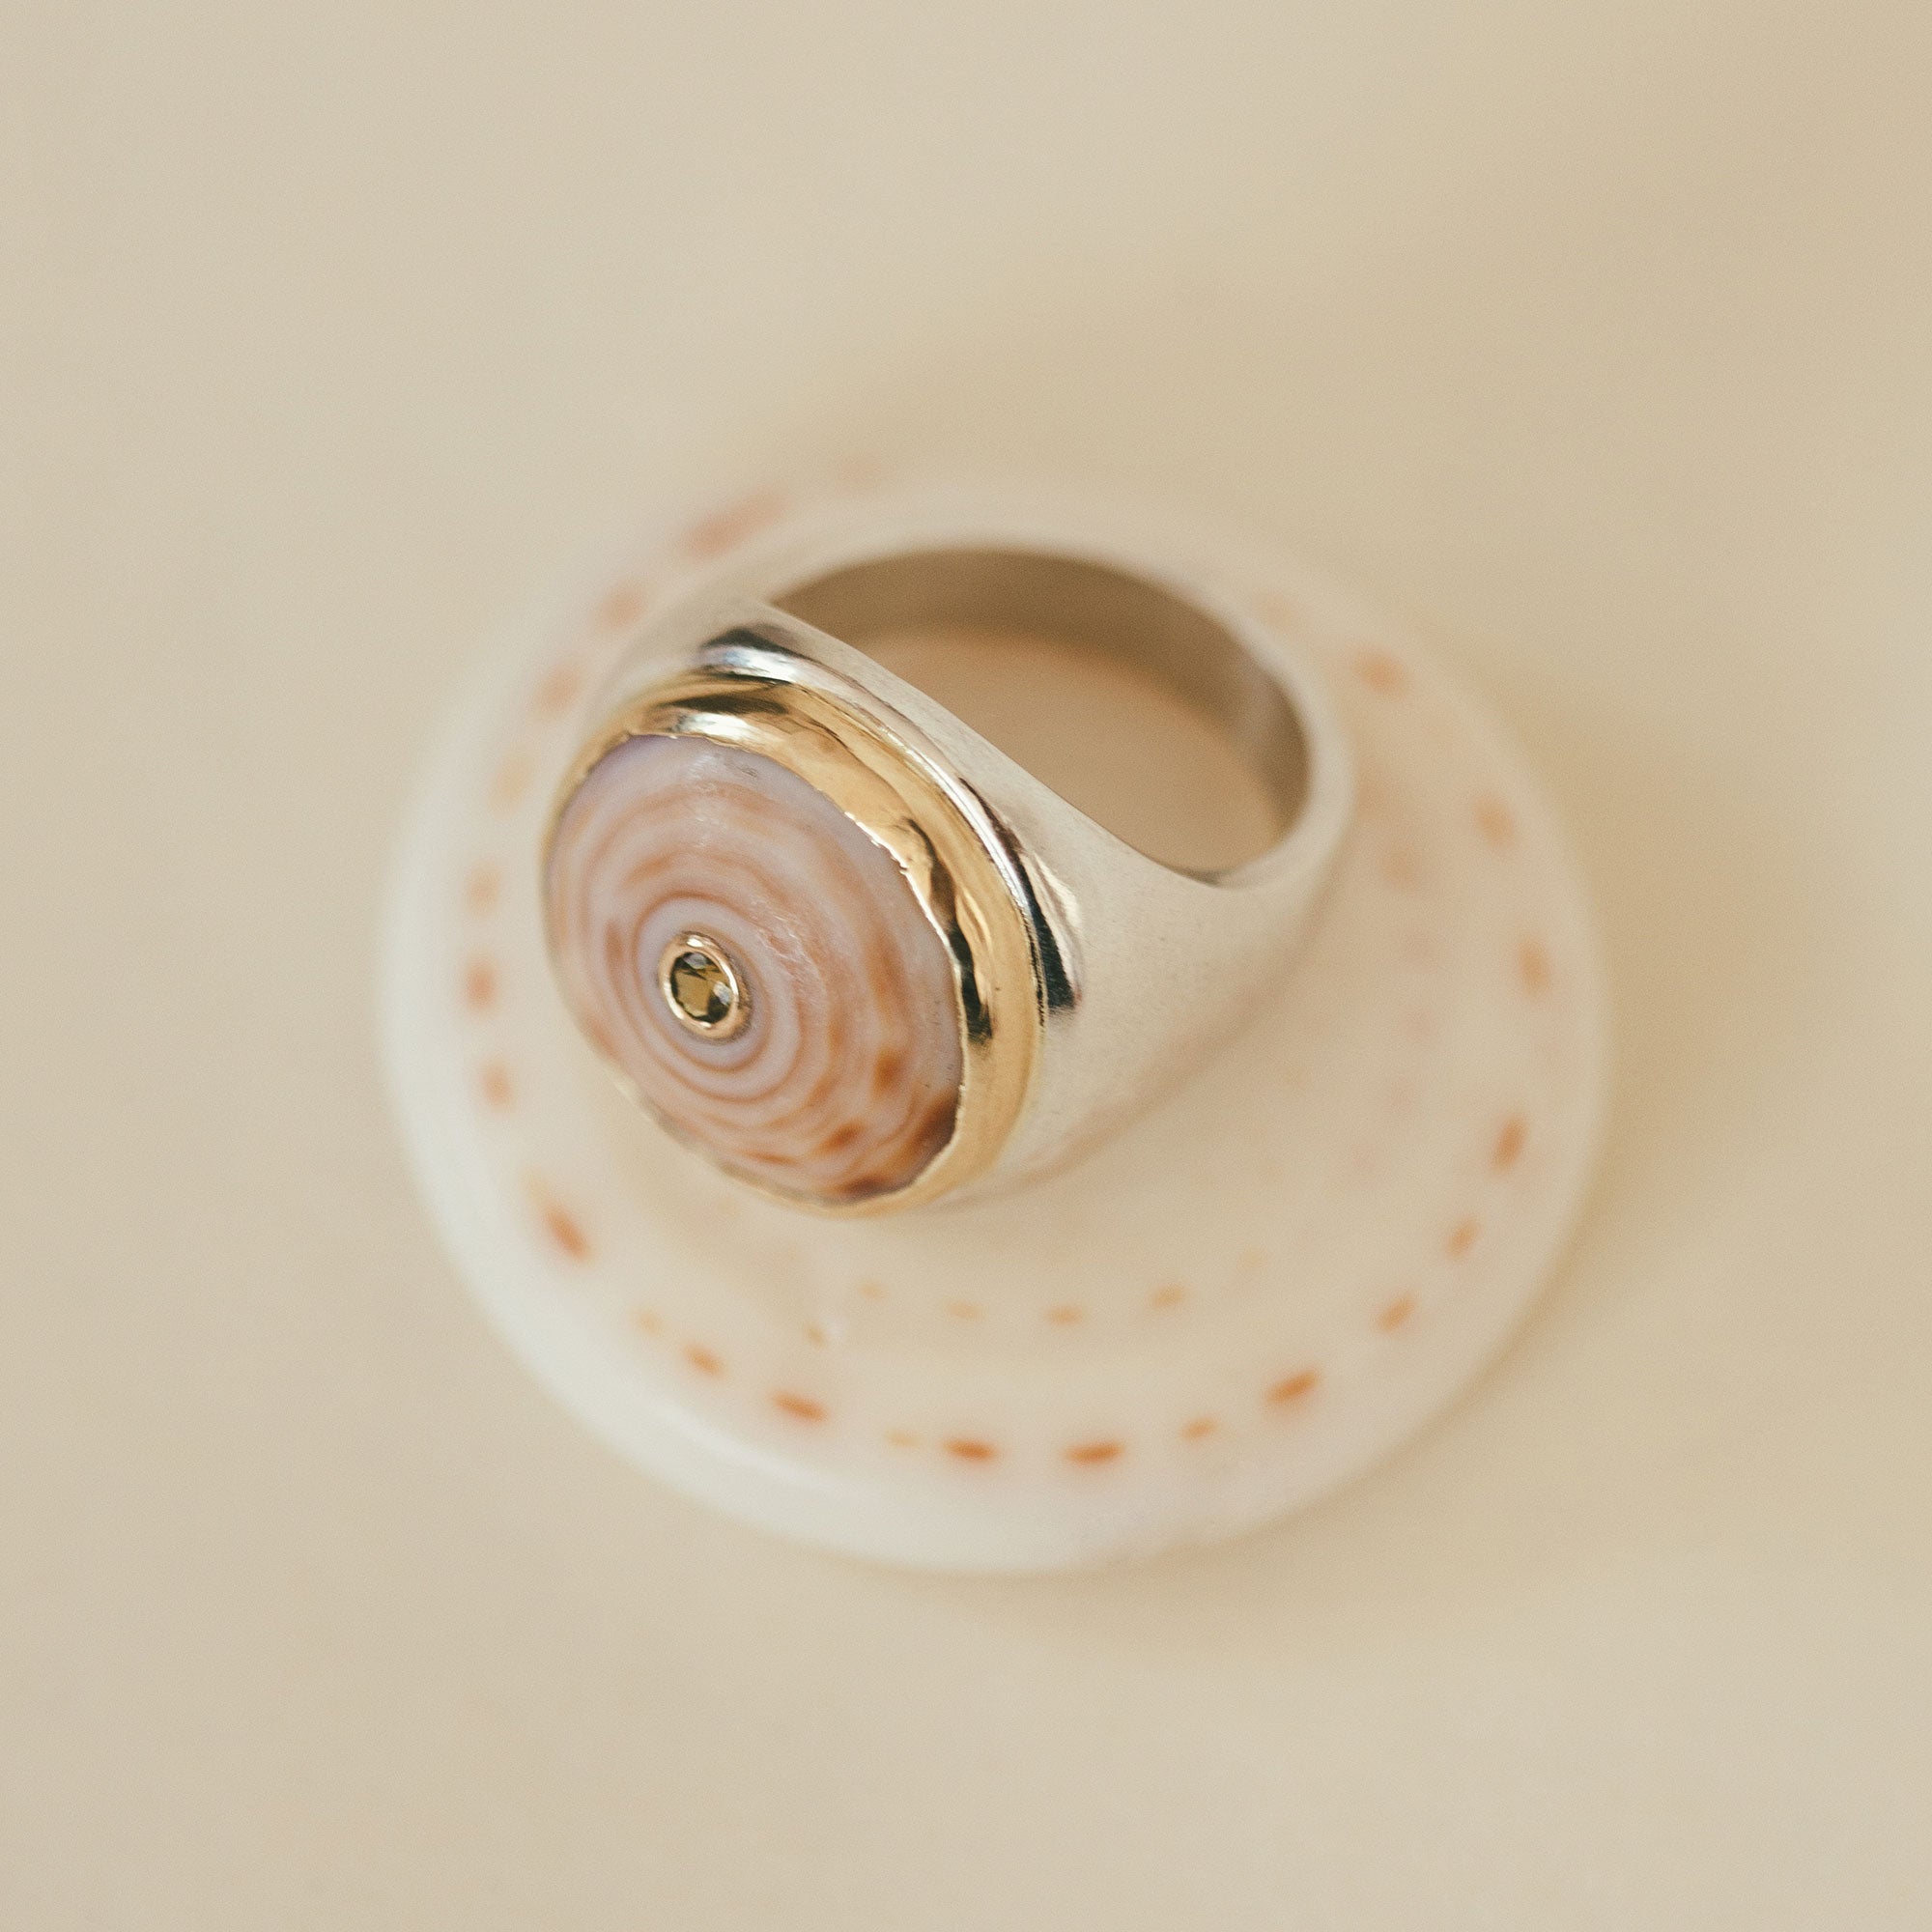 GOLD & SILVER PUKA SHELL RING WITH SAPPHIRE